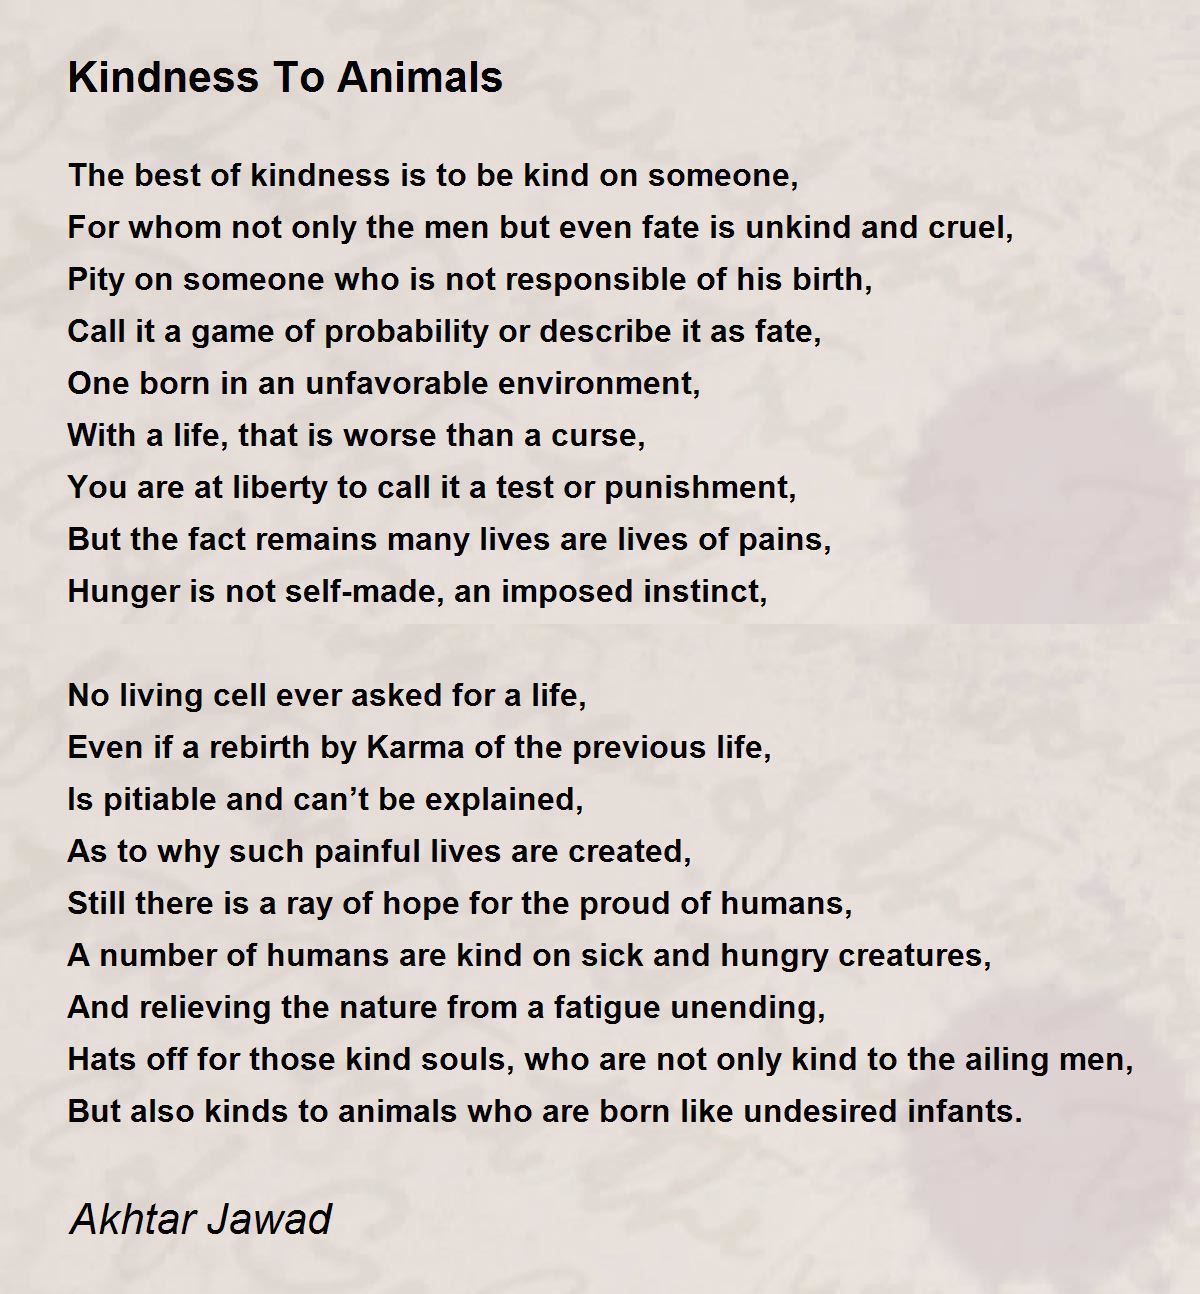 Kindness To Animals - Kindness To Animals Poem by Akhtar Jawad